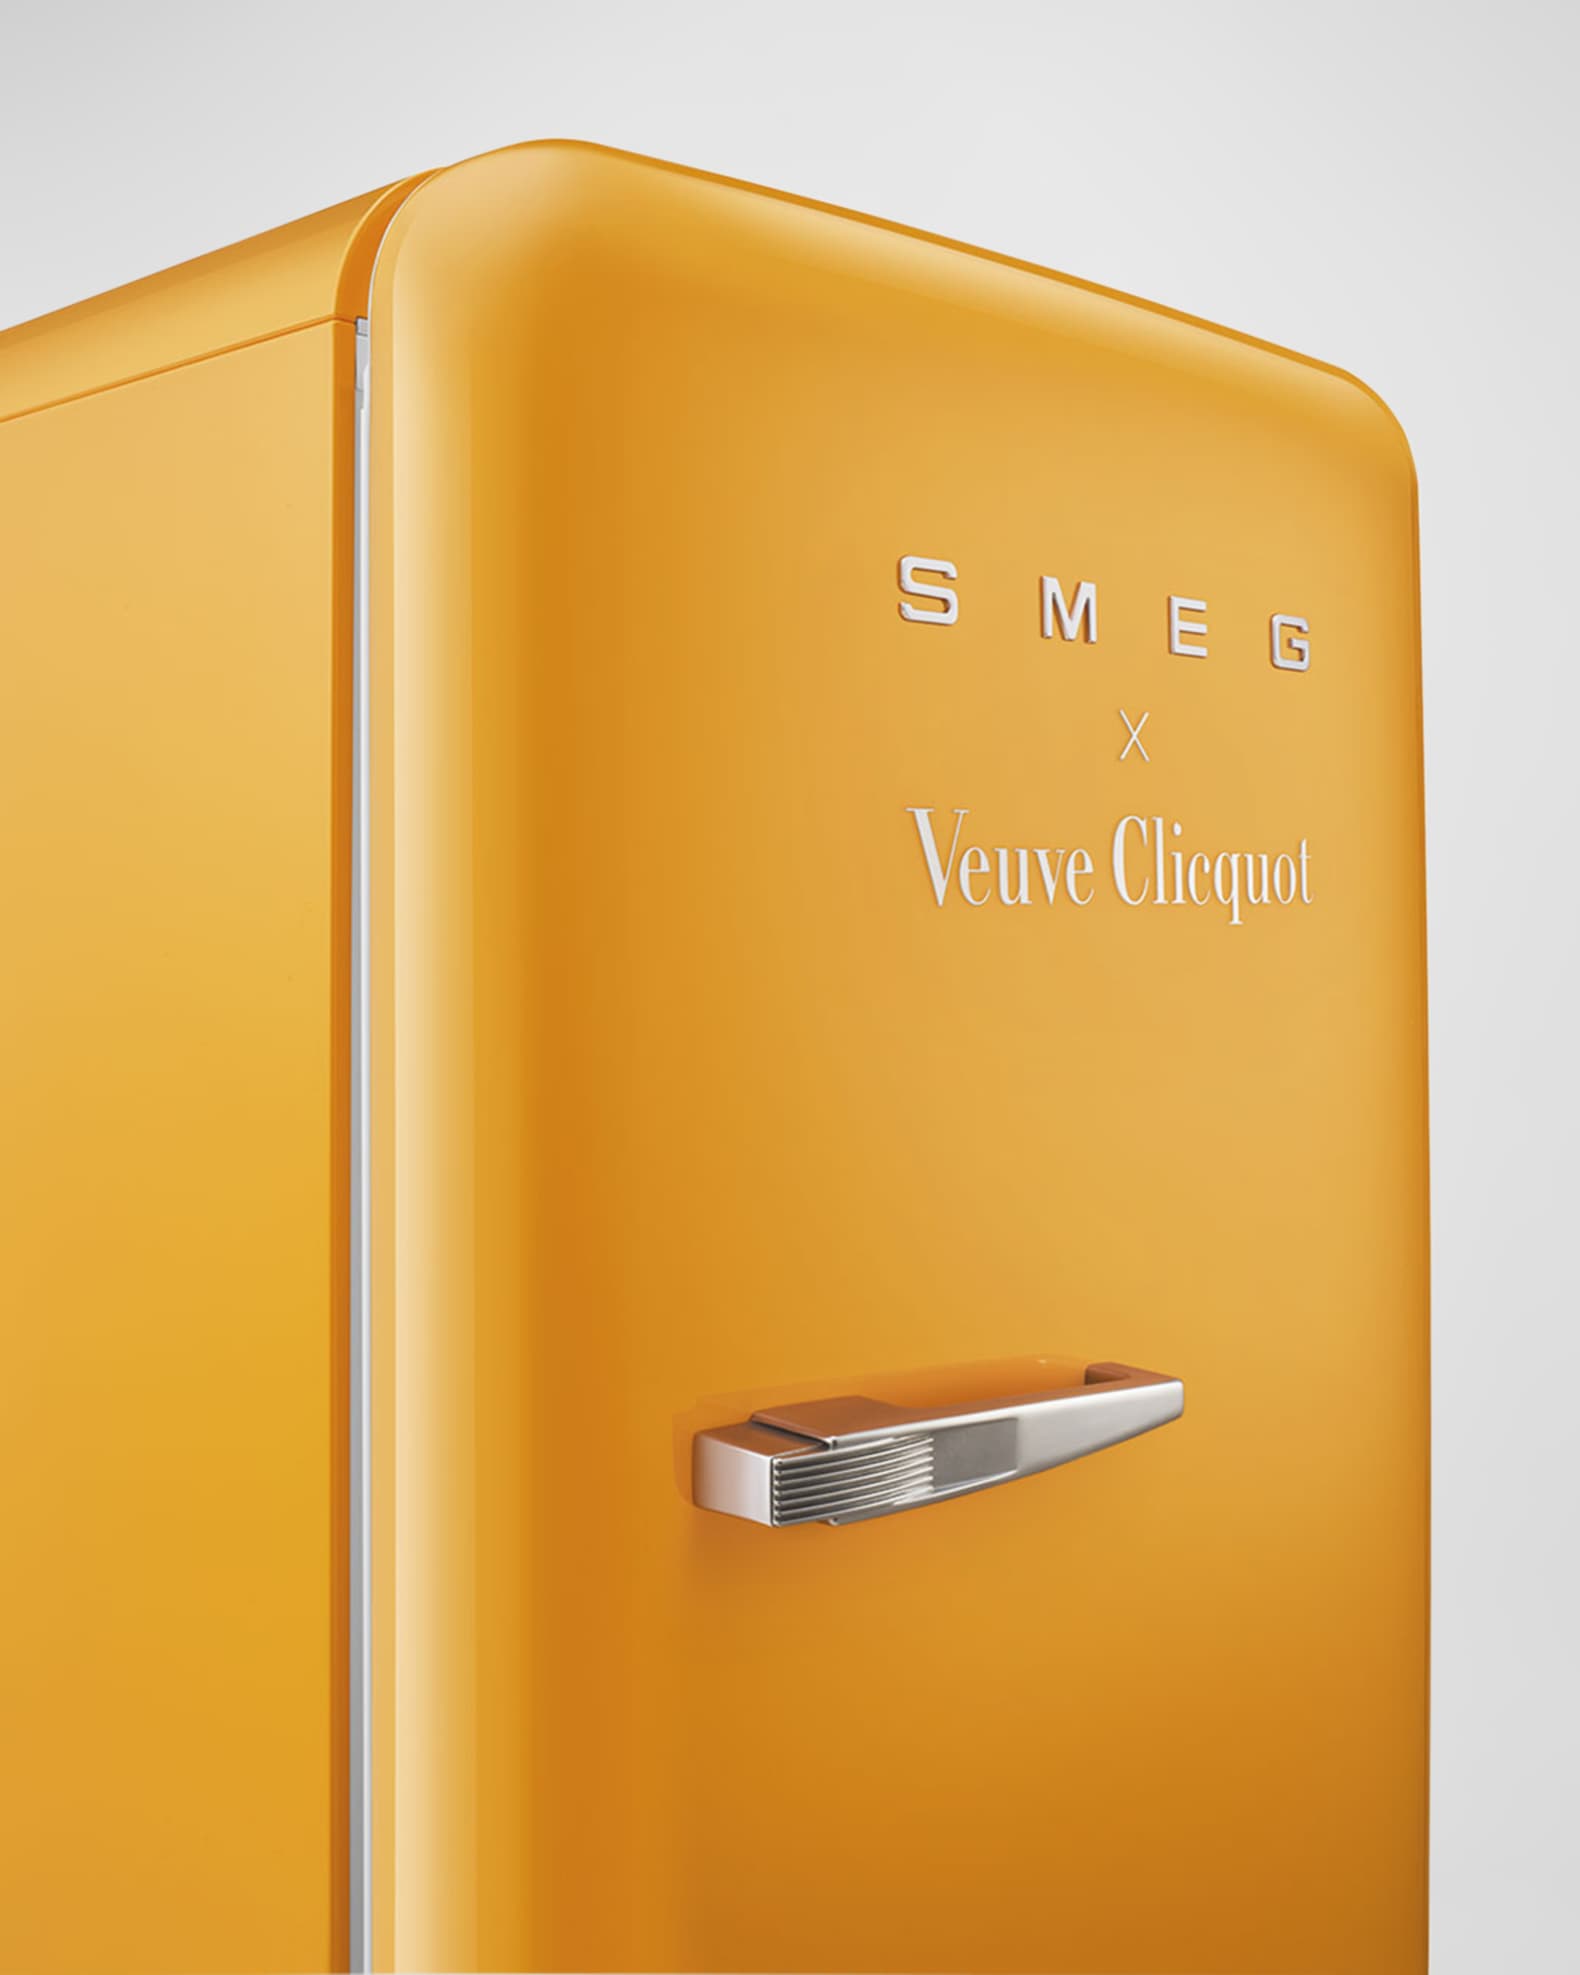 The iconic Smeg fridge gets a makeover in three striking new